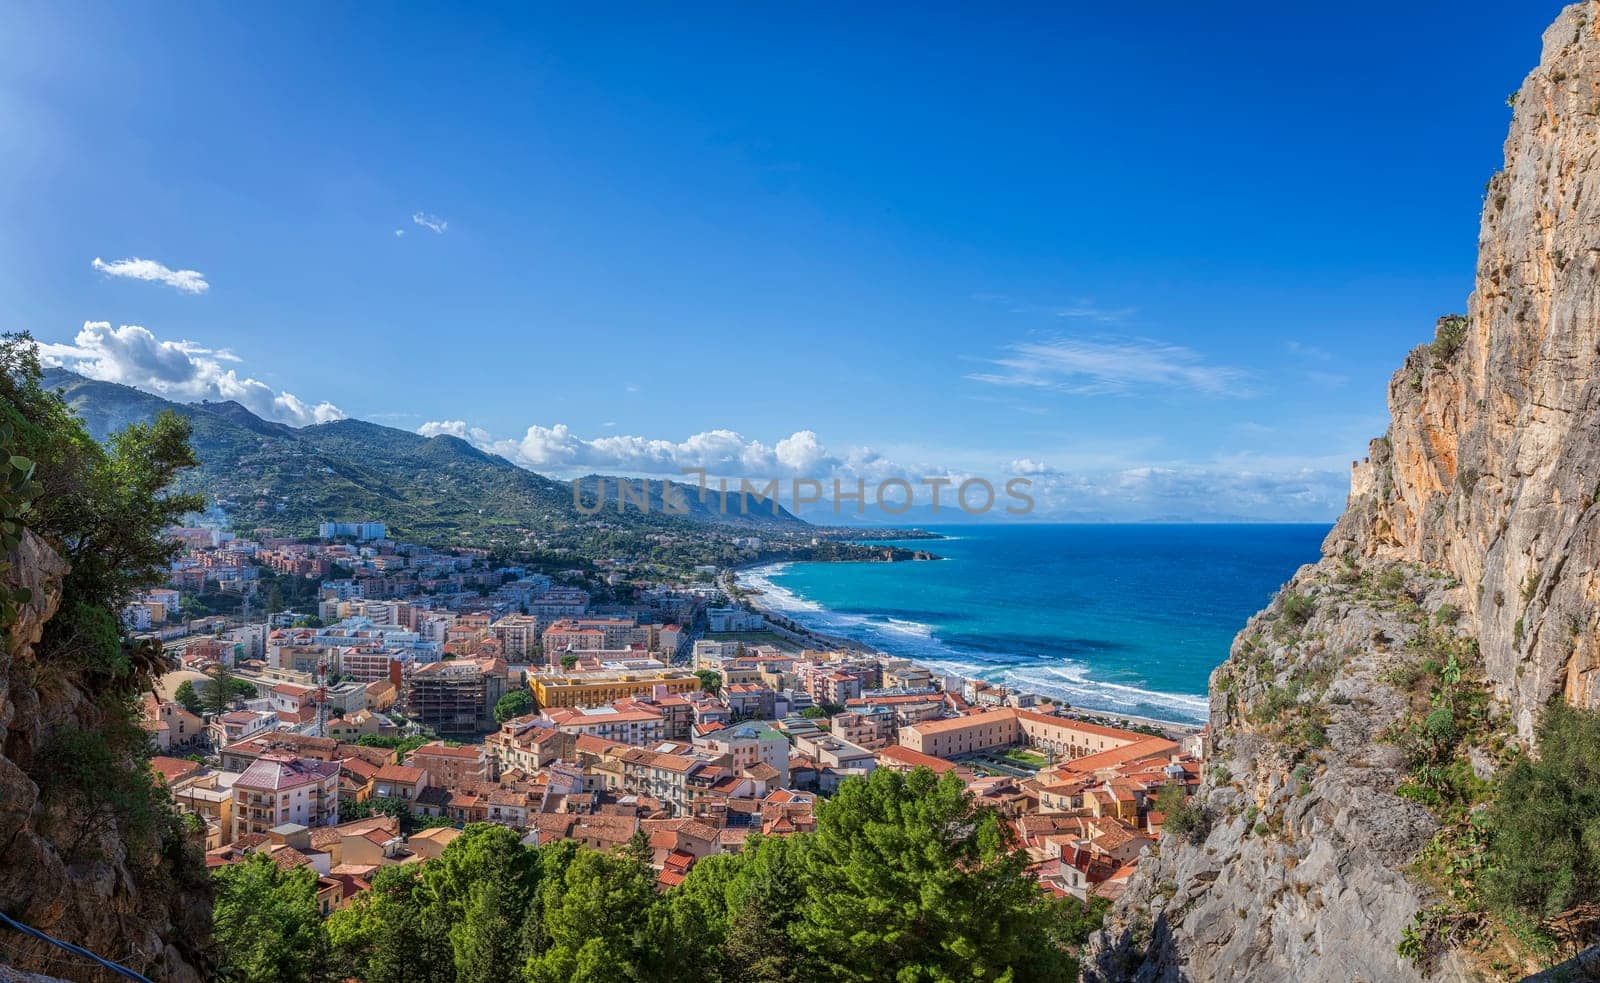 The coast of Cefalu in Sicily, Italy on a beautiful sunny day